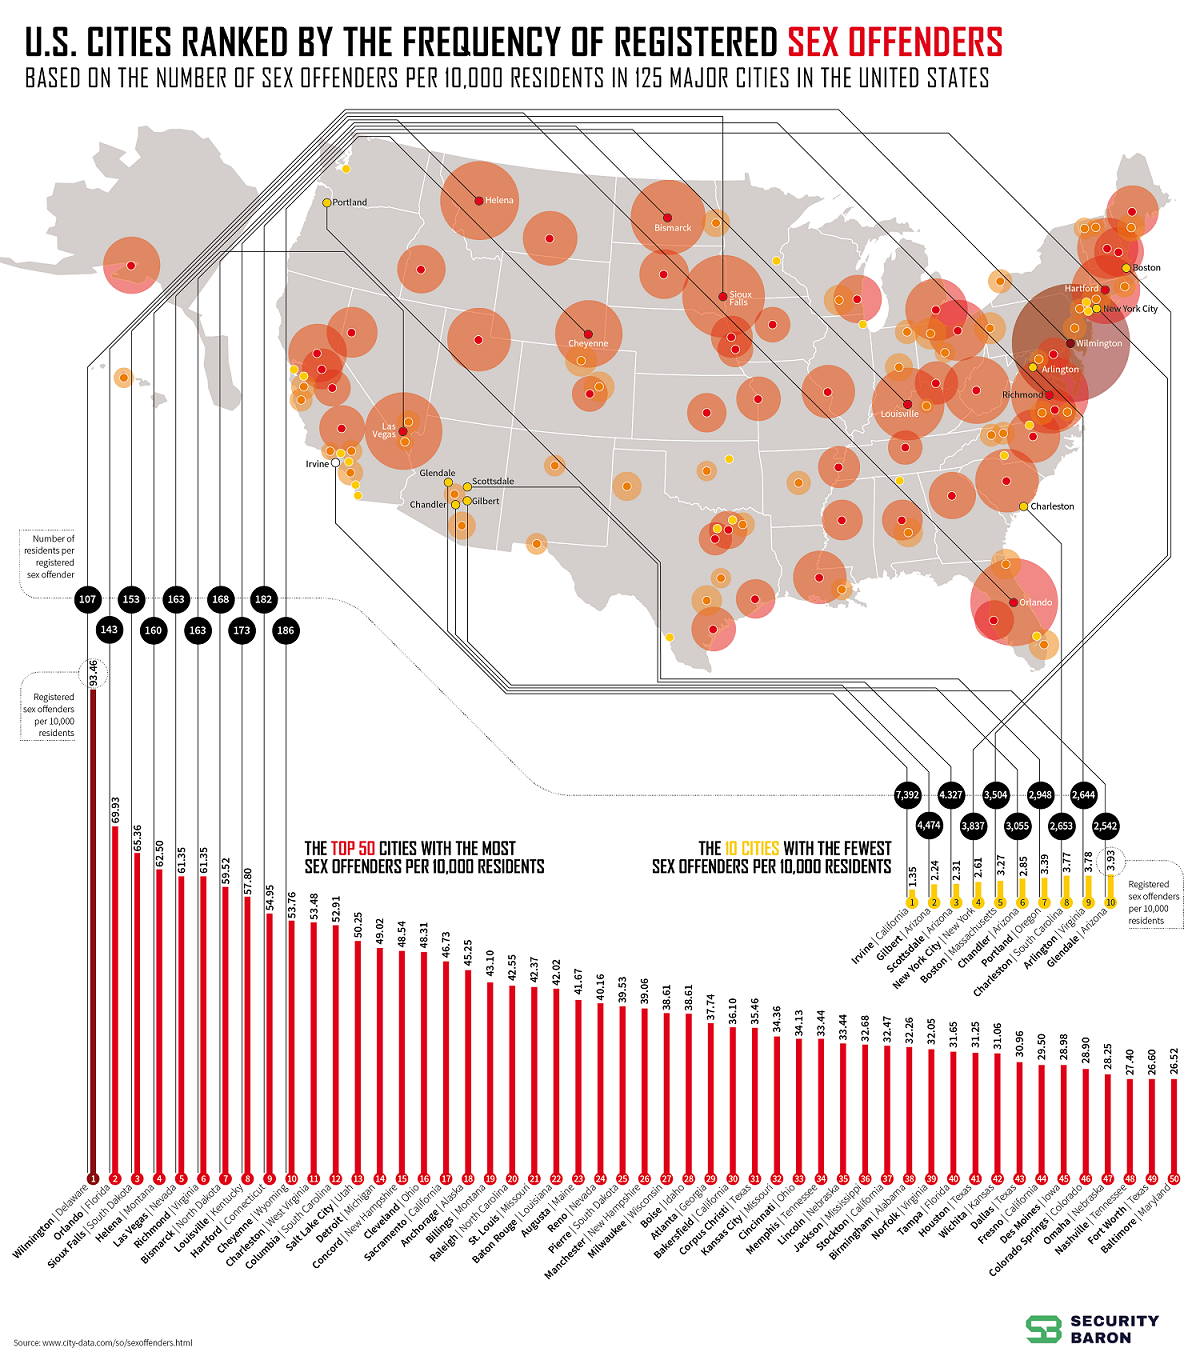 U.S. Cities Ranked by Frequency of Registered Sex Offenders #infographic